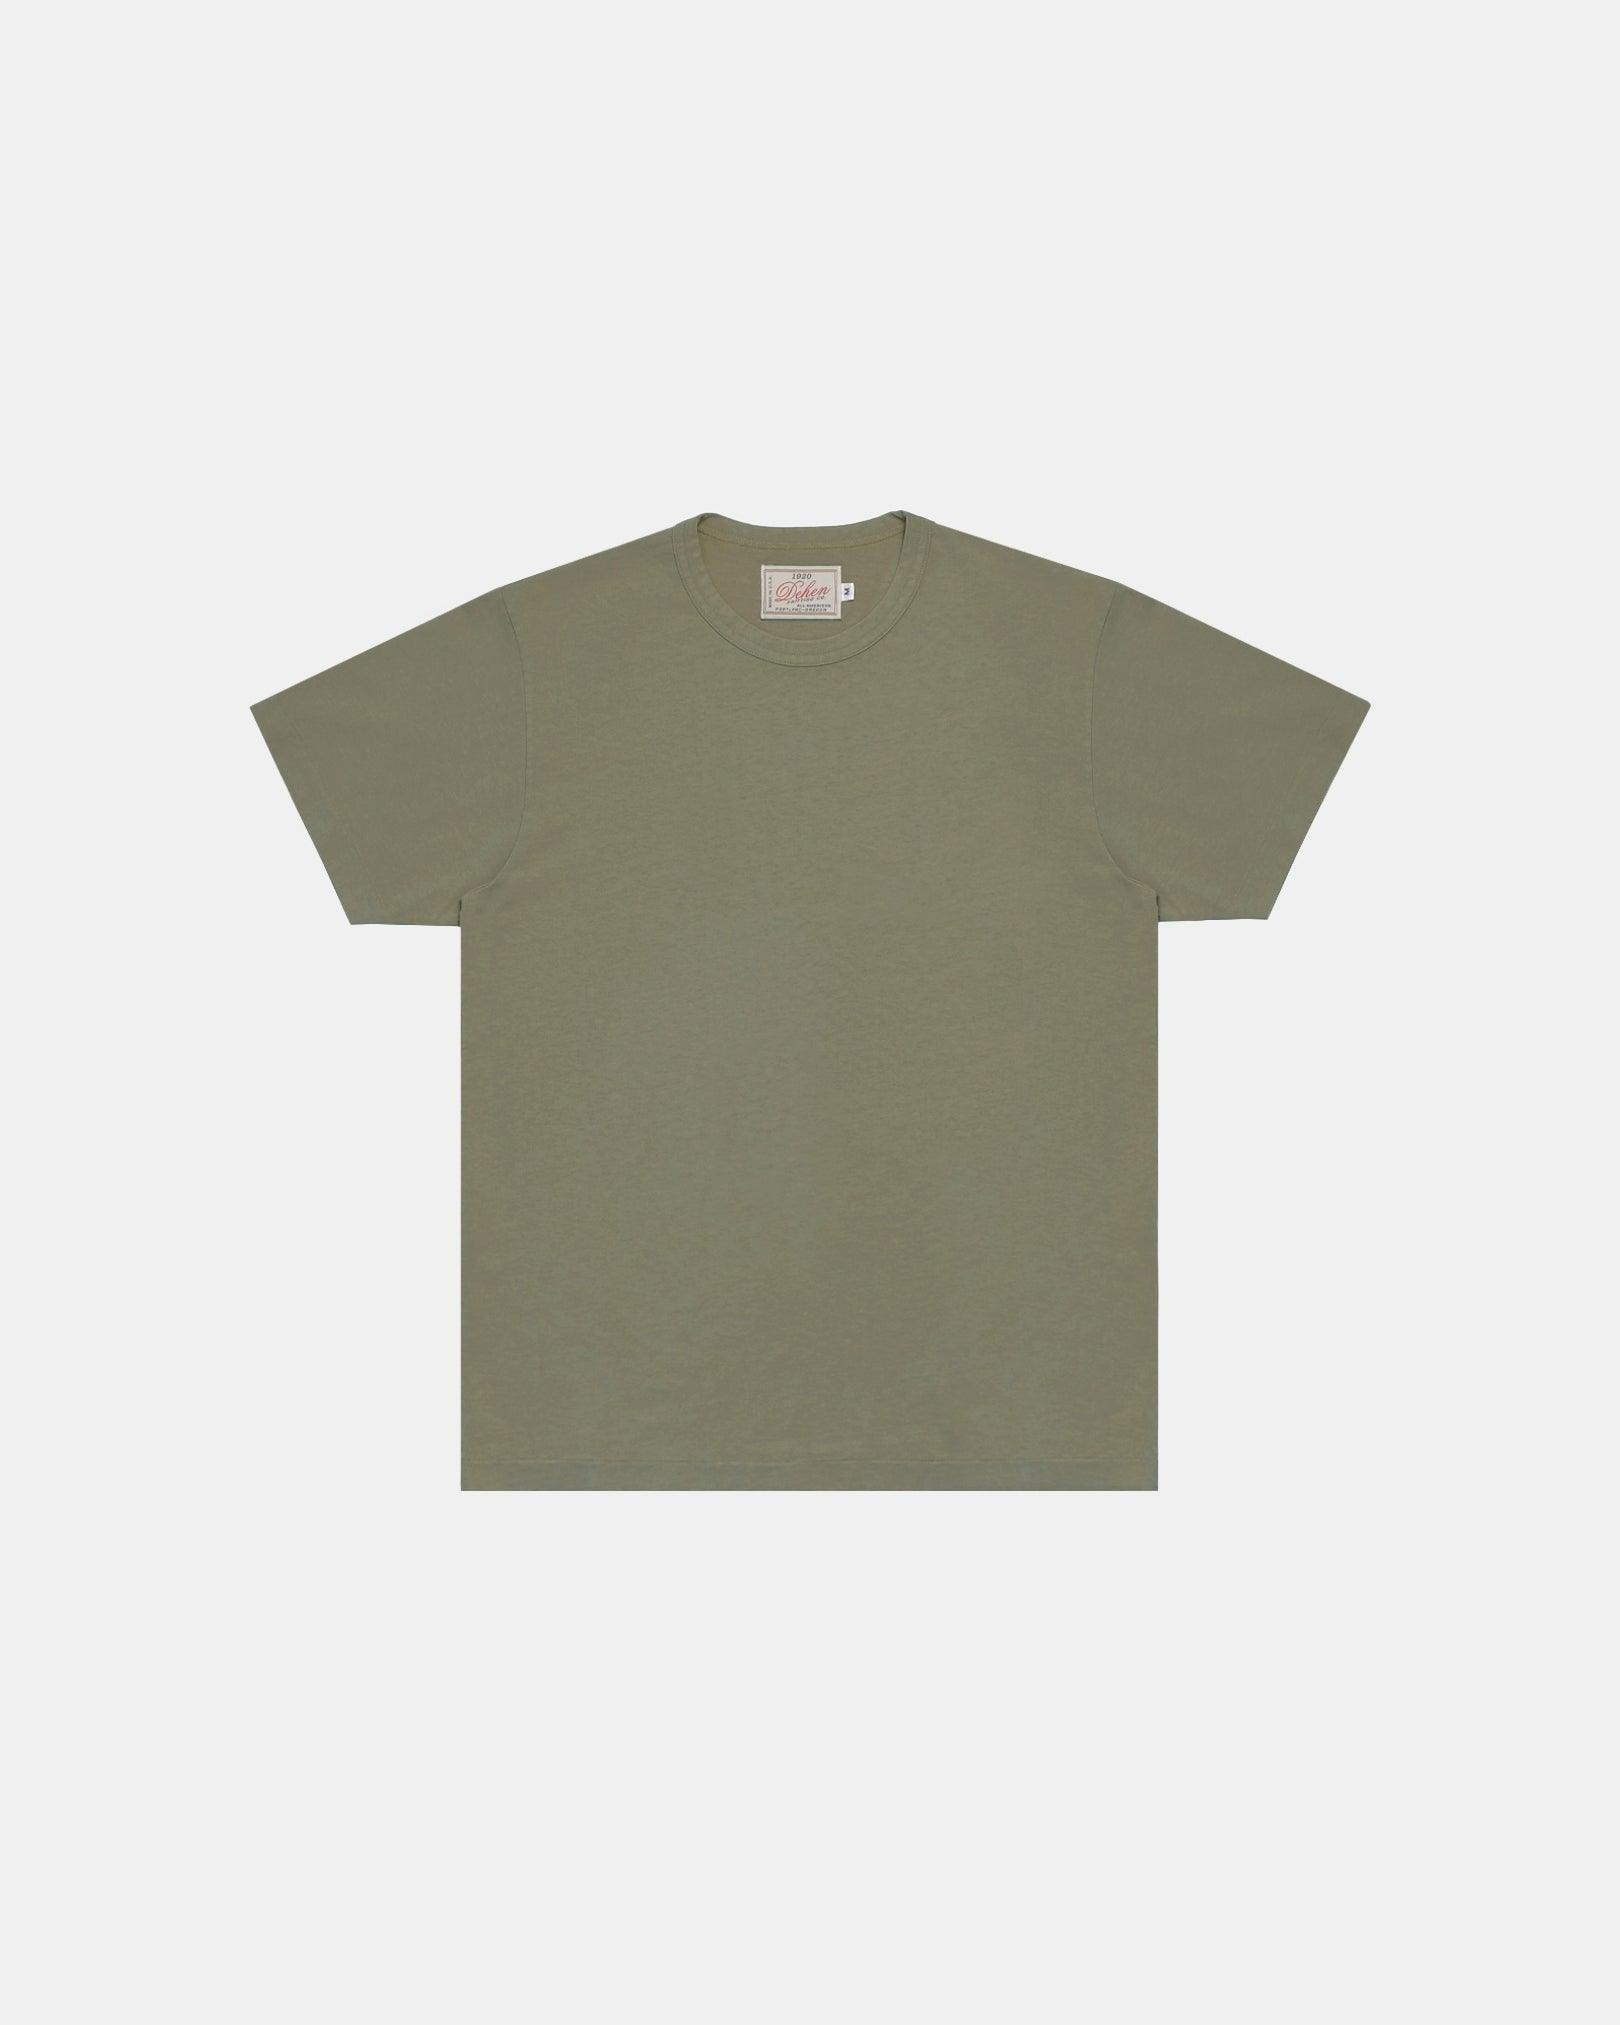 Image showing the DE-TS01-OLV - Heavy Duty T-Shirt - Olive which is a T-Shirts described by the following info Bargain, Dehen 1920, Released, T-Shirts, Tops and sold on the IRON HEART GERMANY online store